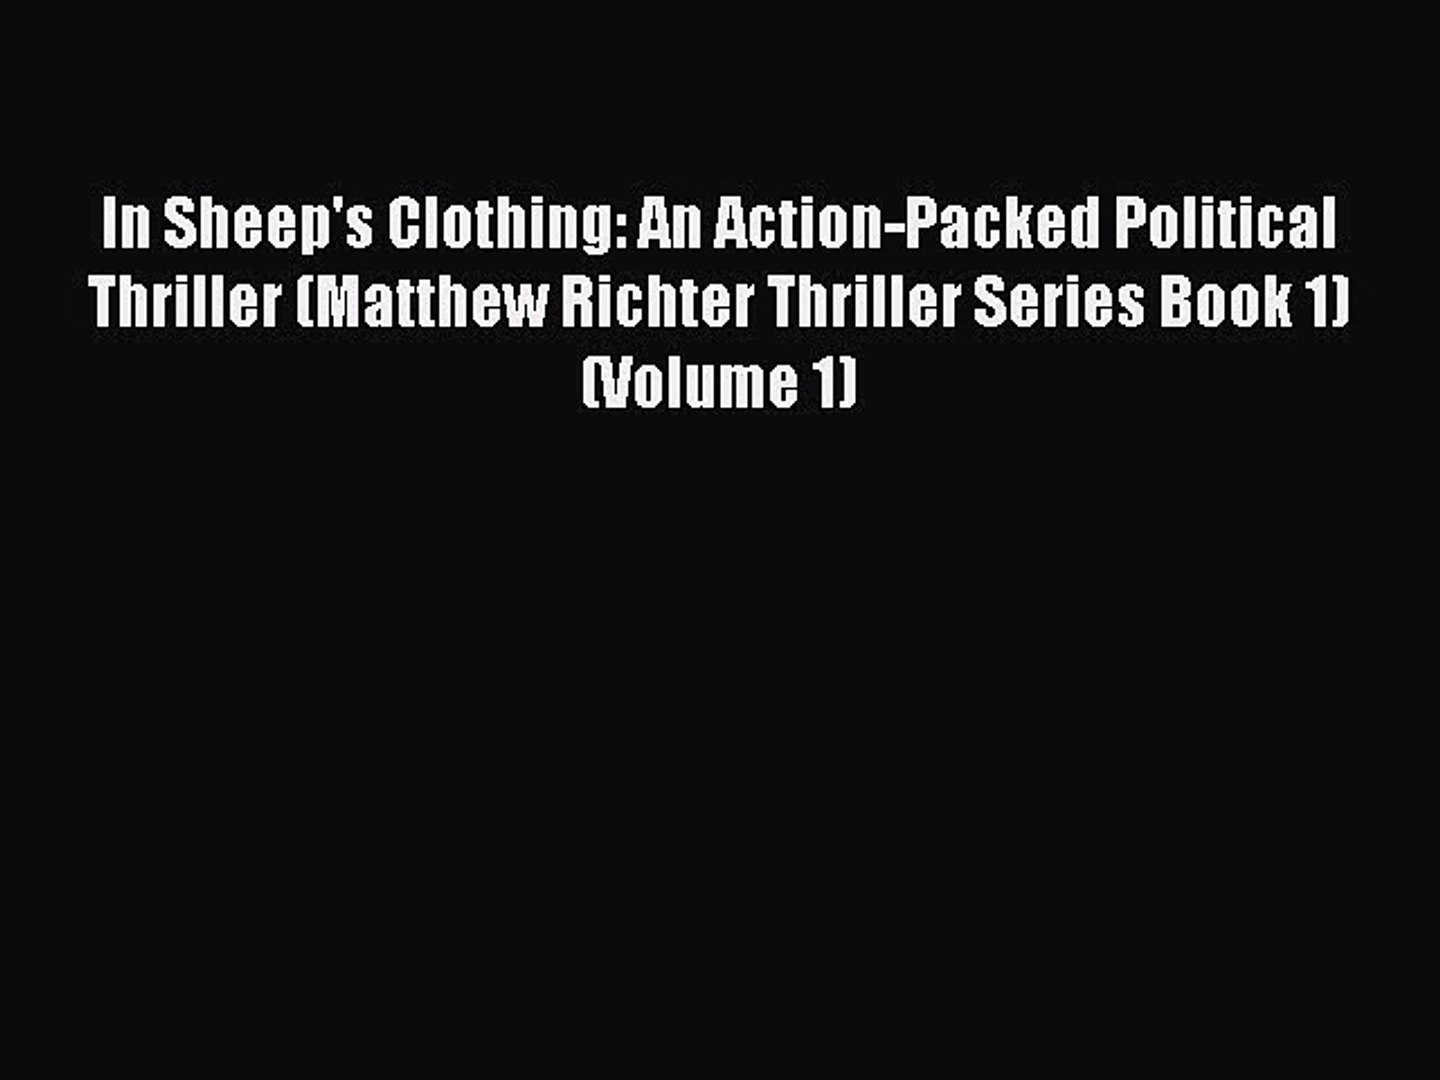 In Sheep's Clothing: An Action-Packed Political Thriller (Matthew Richter Thriller Series Book